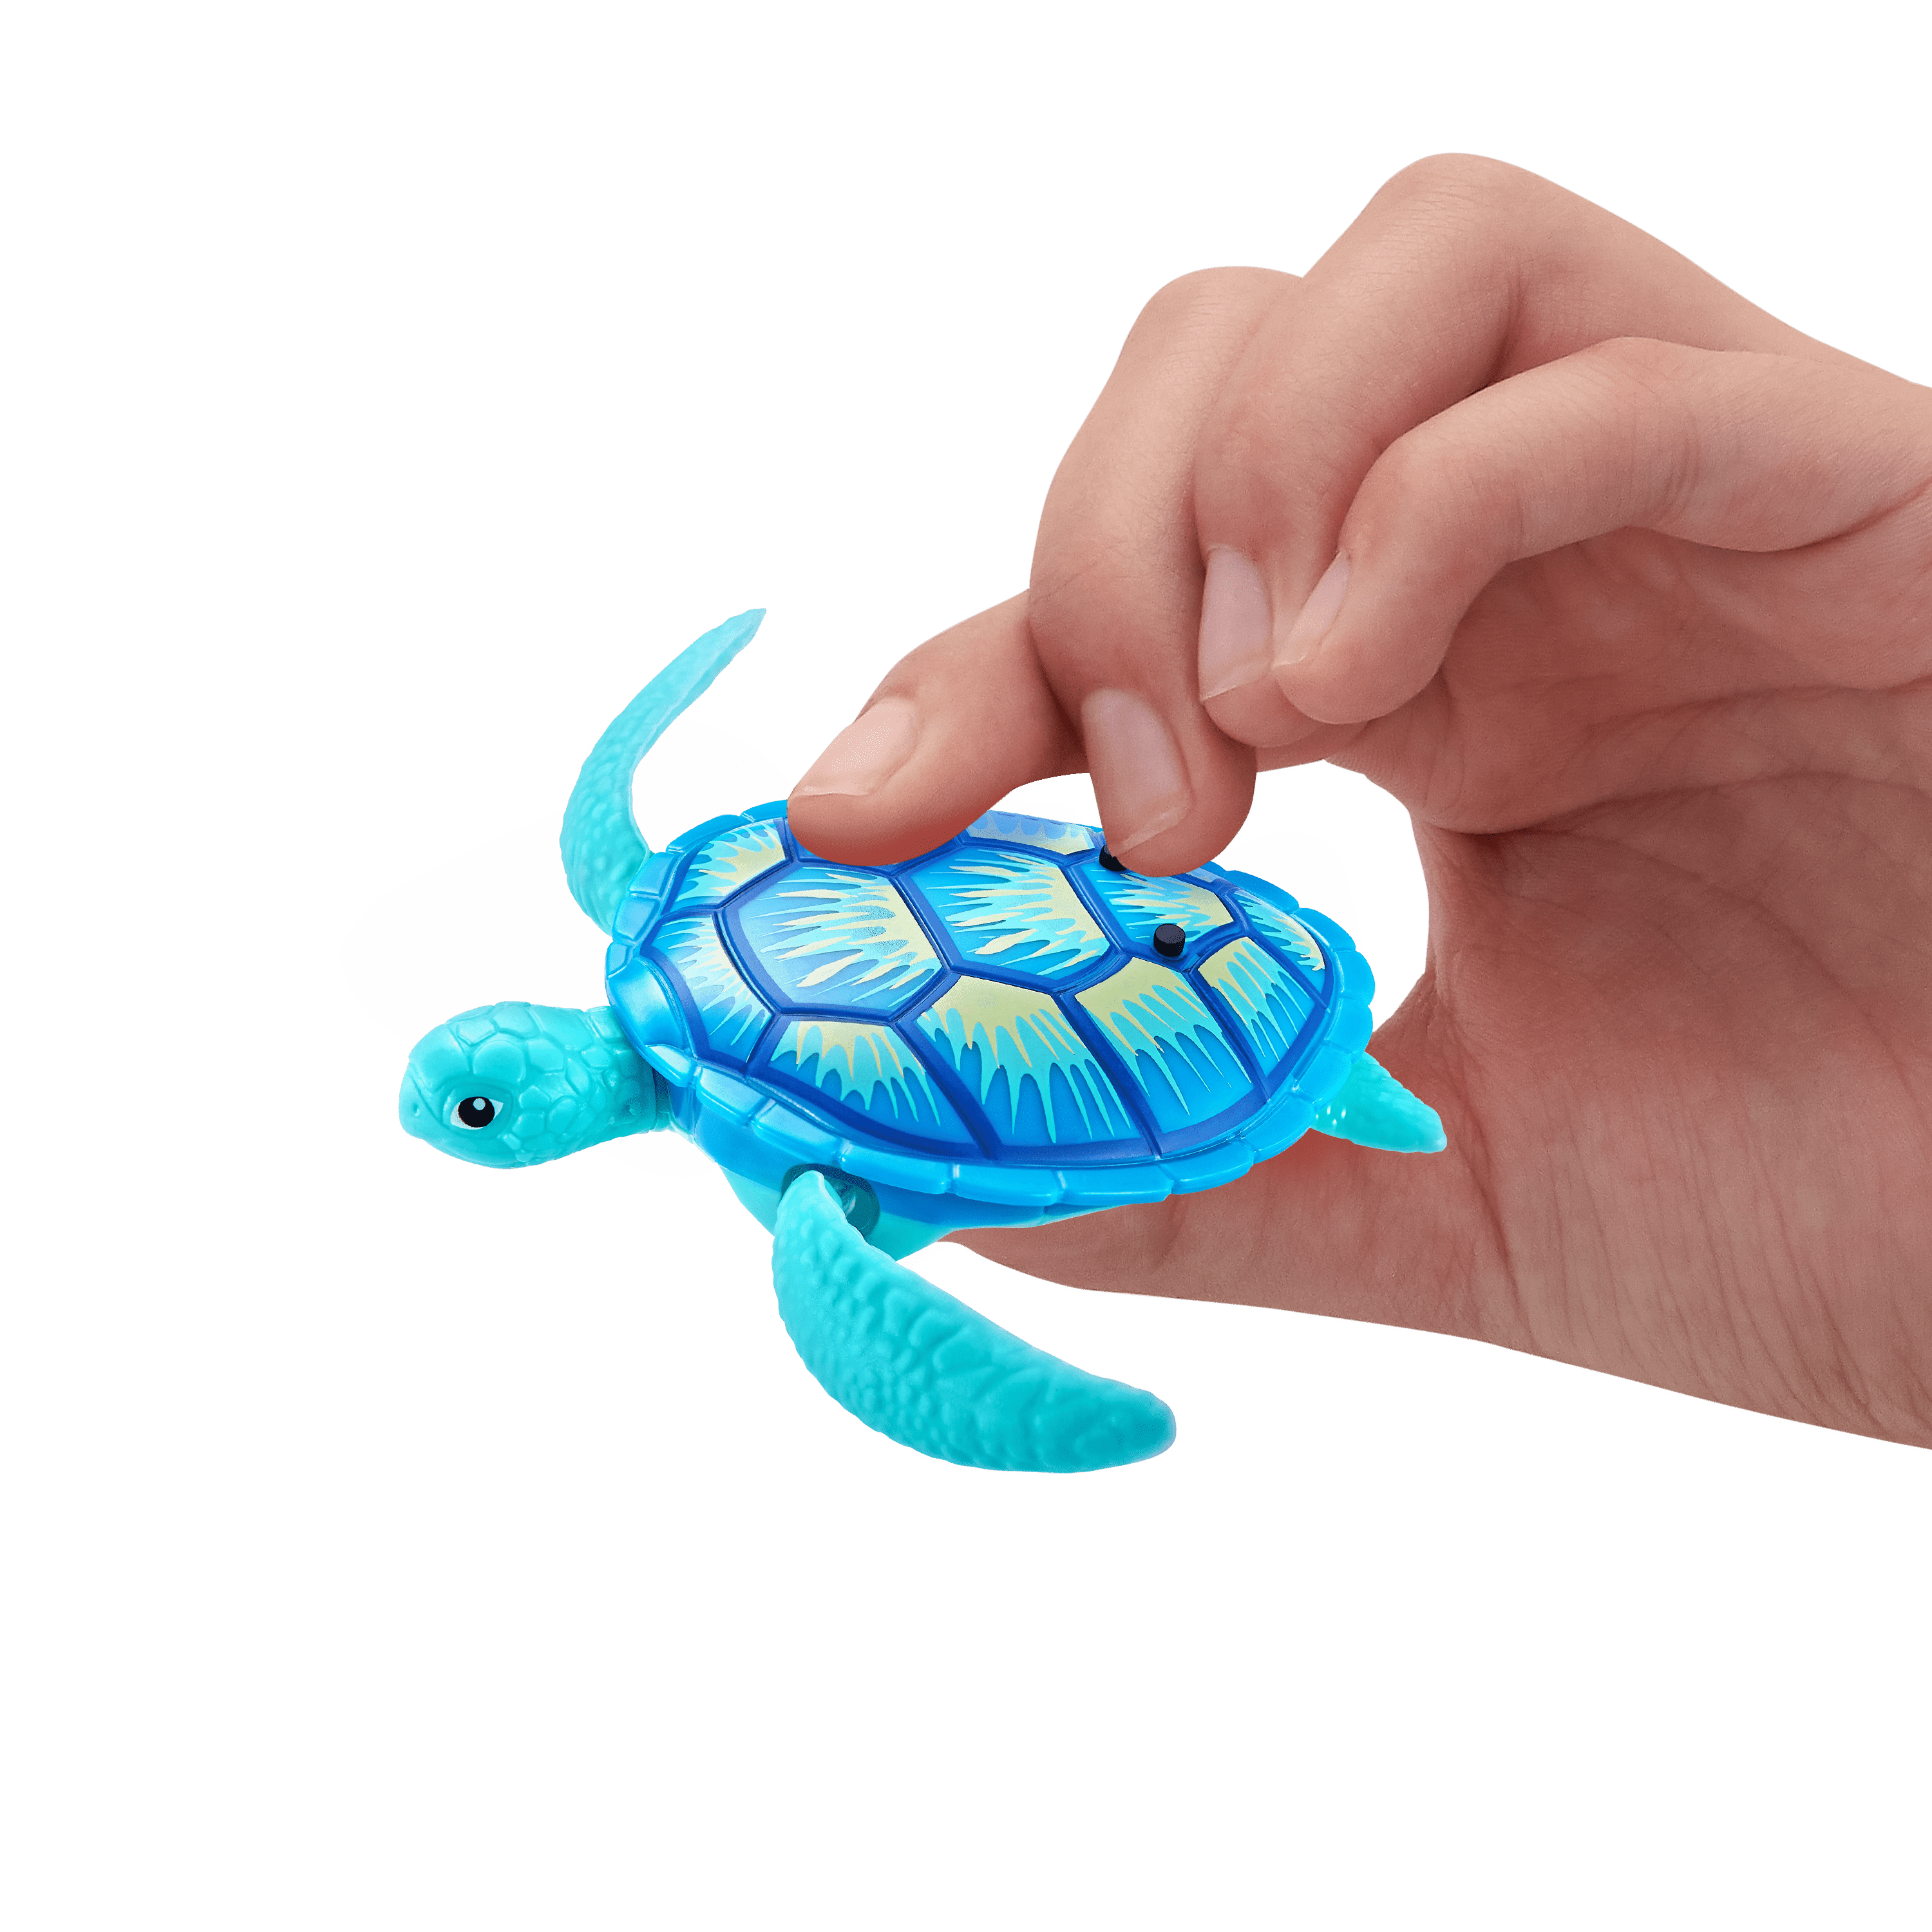 Robo Alive Turtle 2 Pack by Zuru Electronic Pet Action Figure 